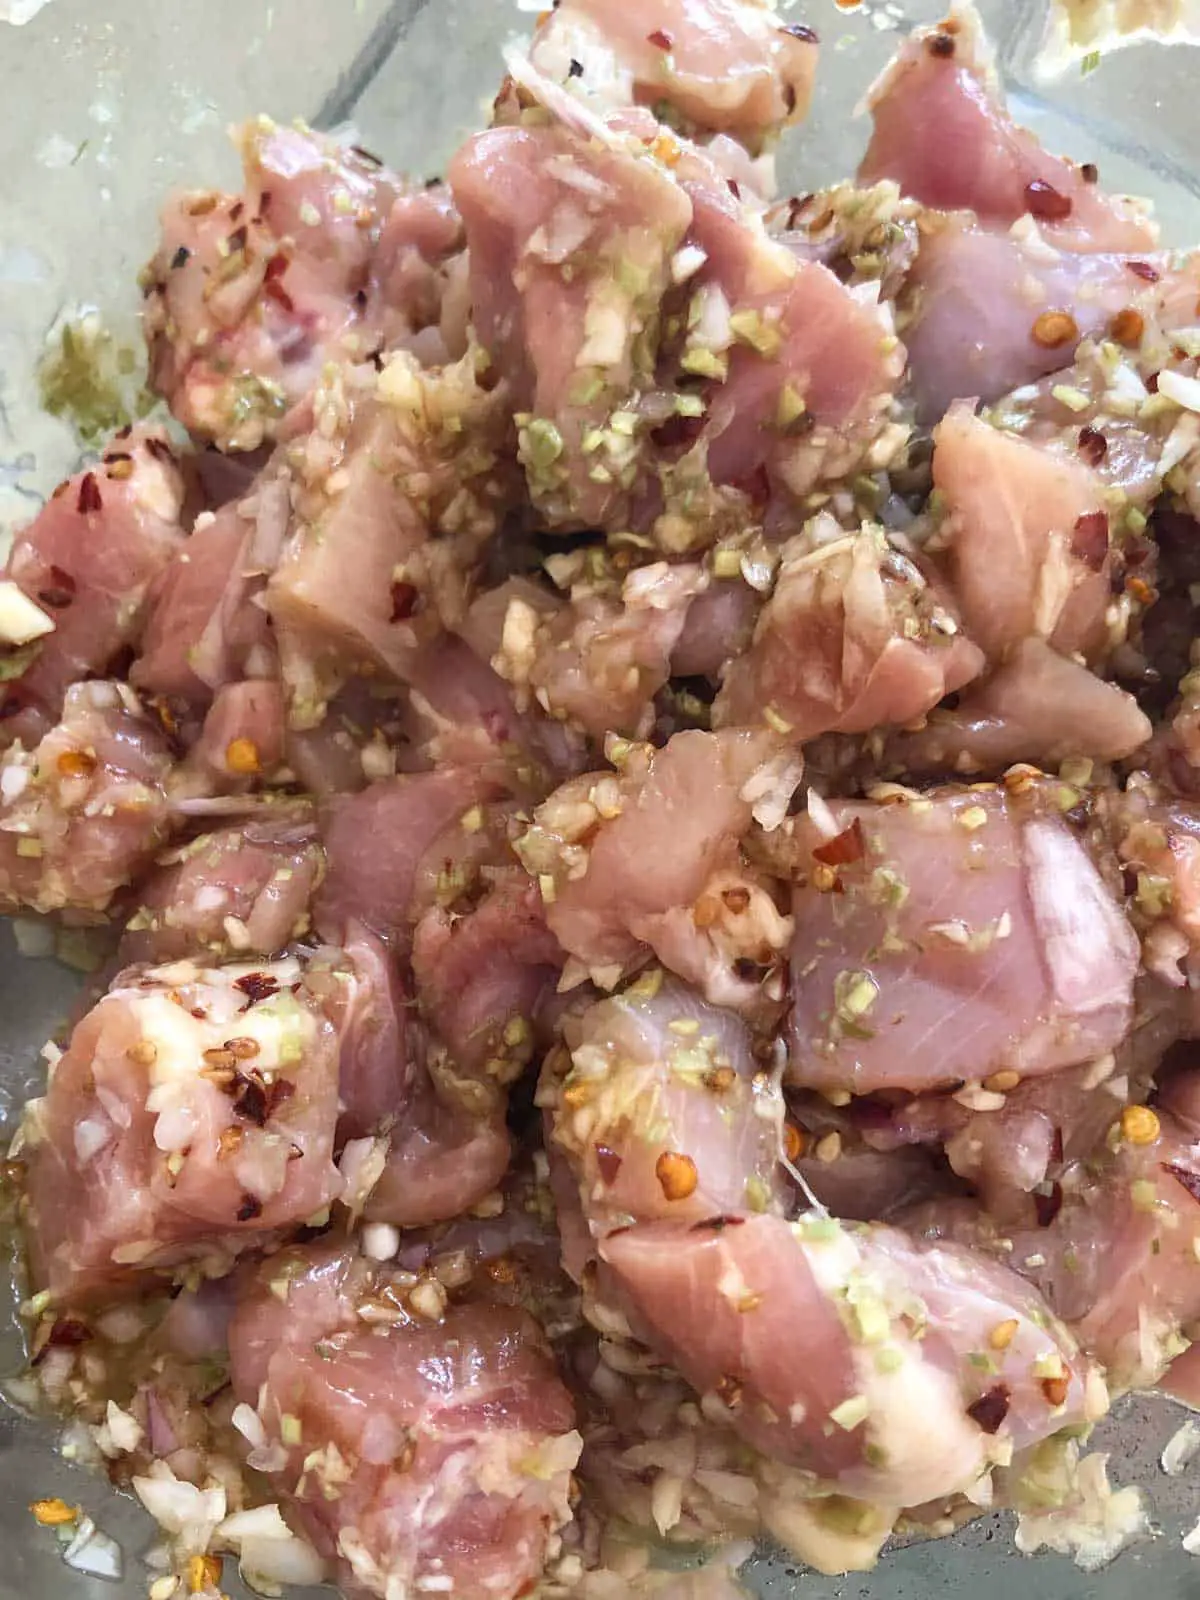 Uncooked pieces of chicken marinating with lemongrass, chili flakes, shallots and minced garlic.